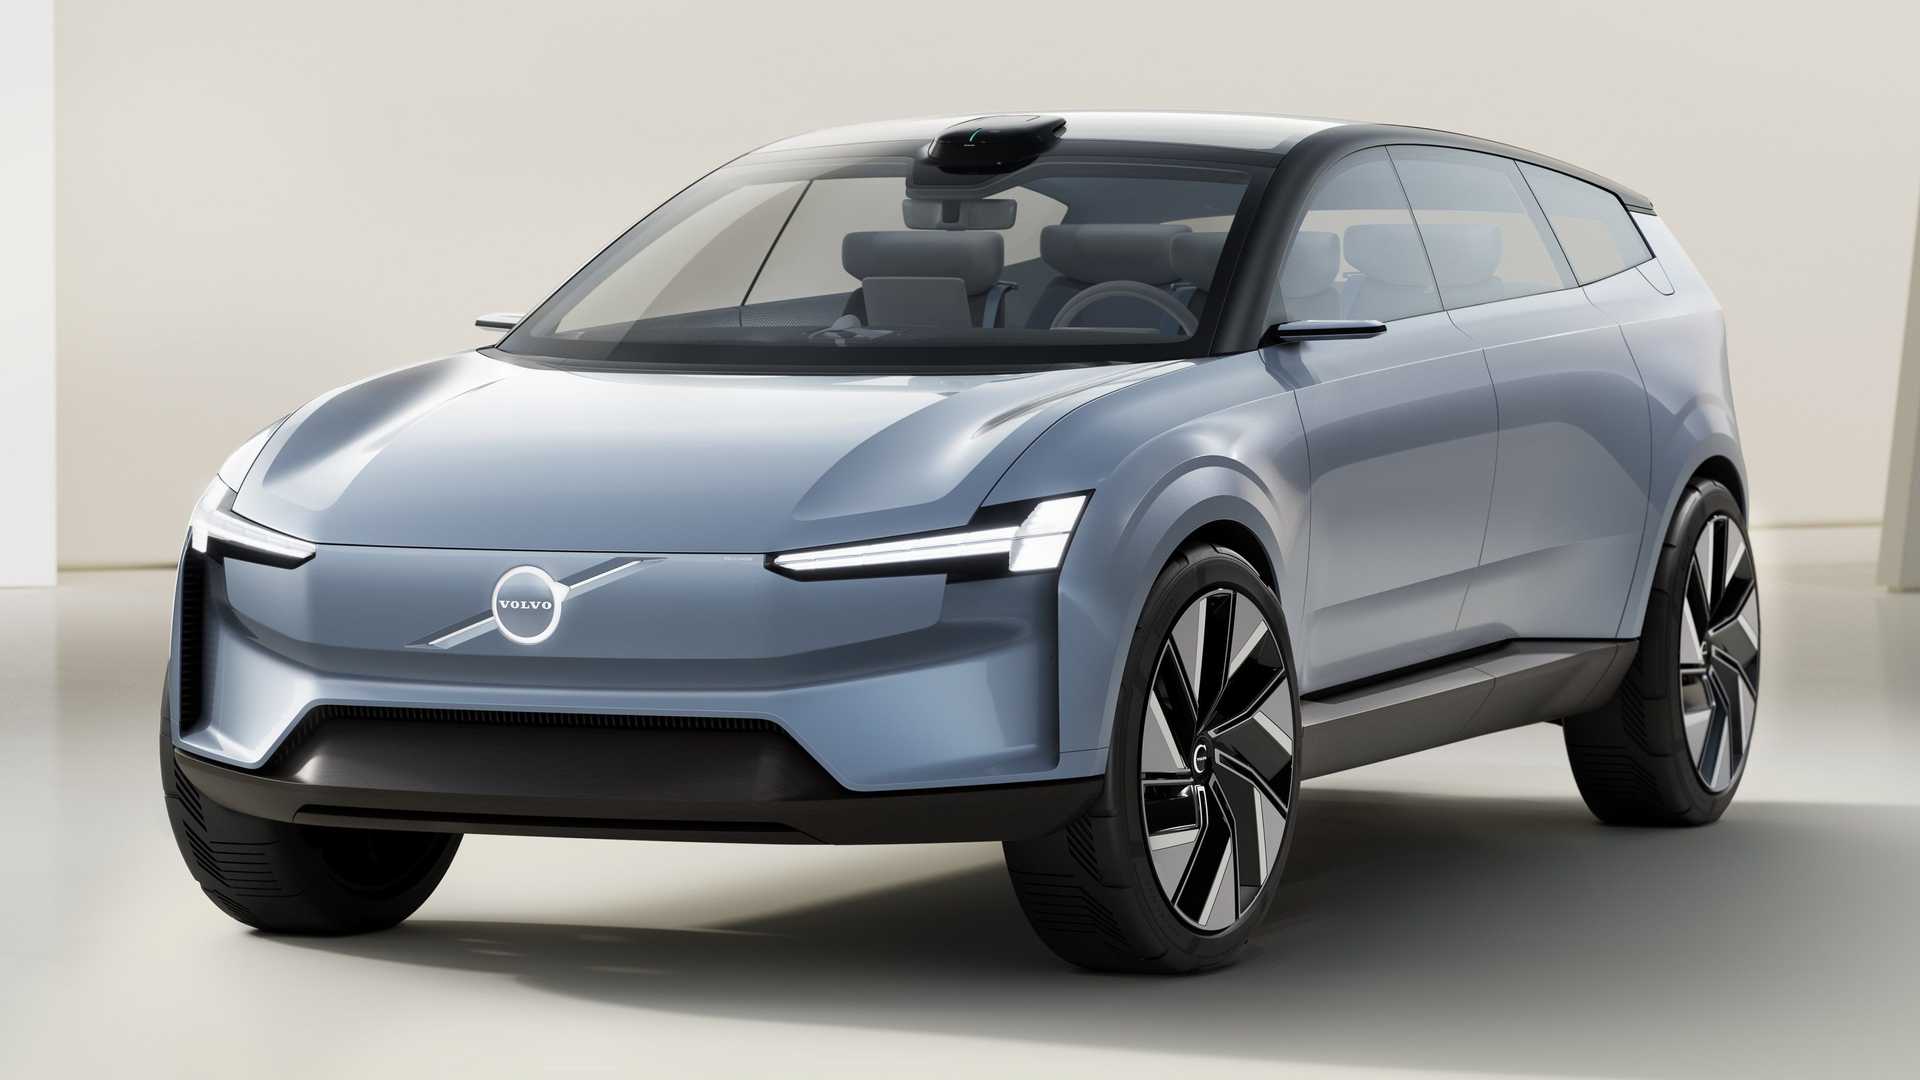 volvo-concept-recharge-exterior-front-view.jpeg